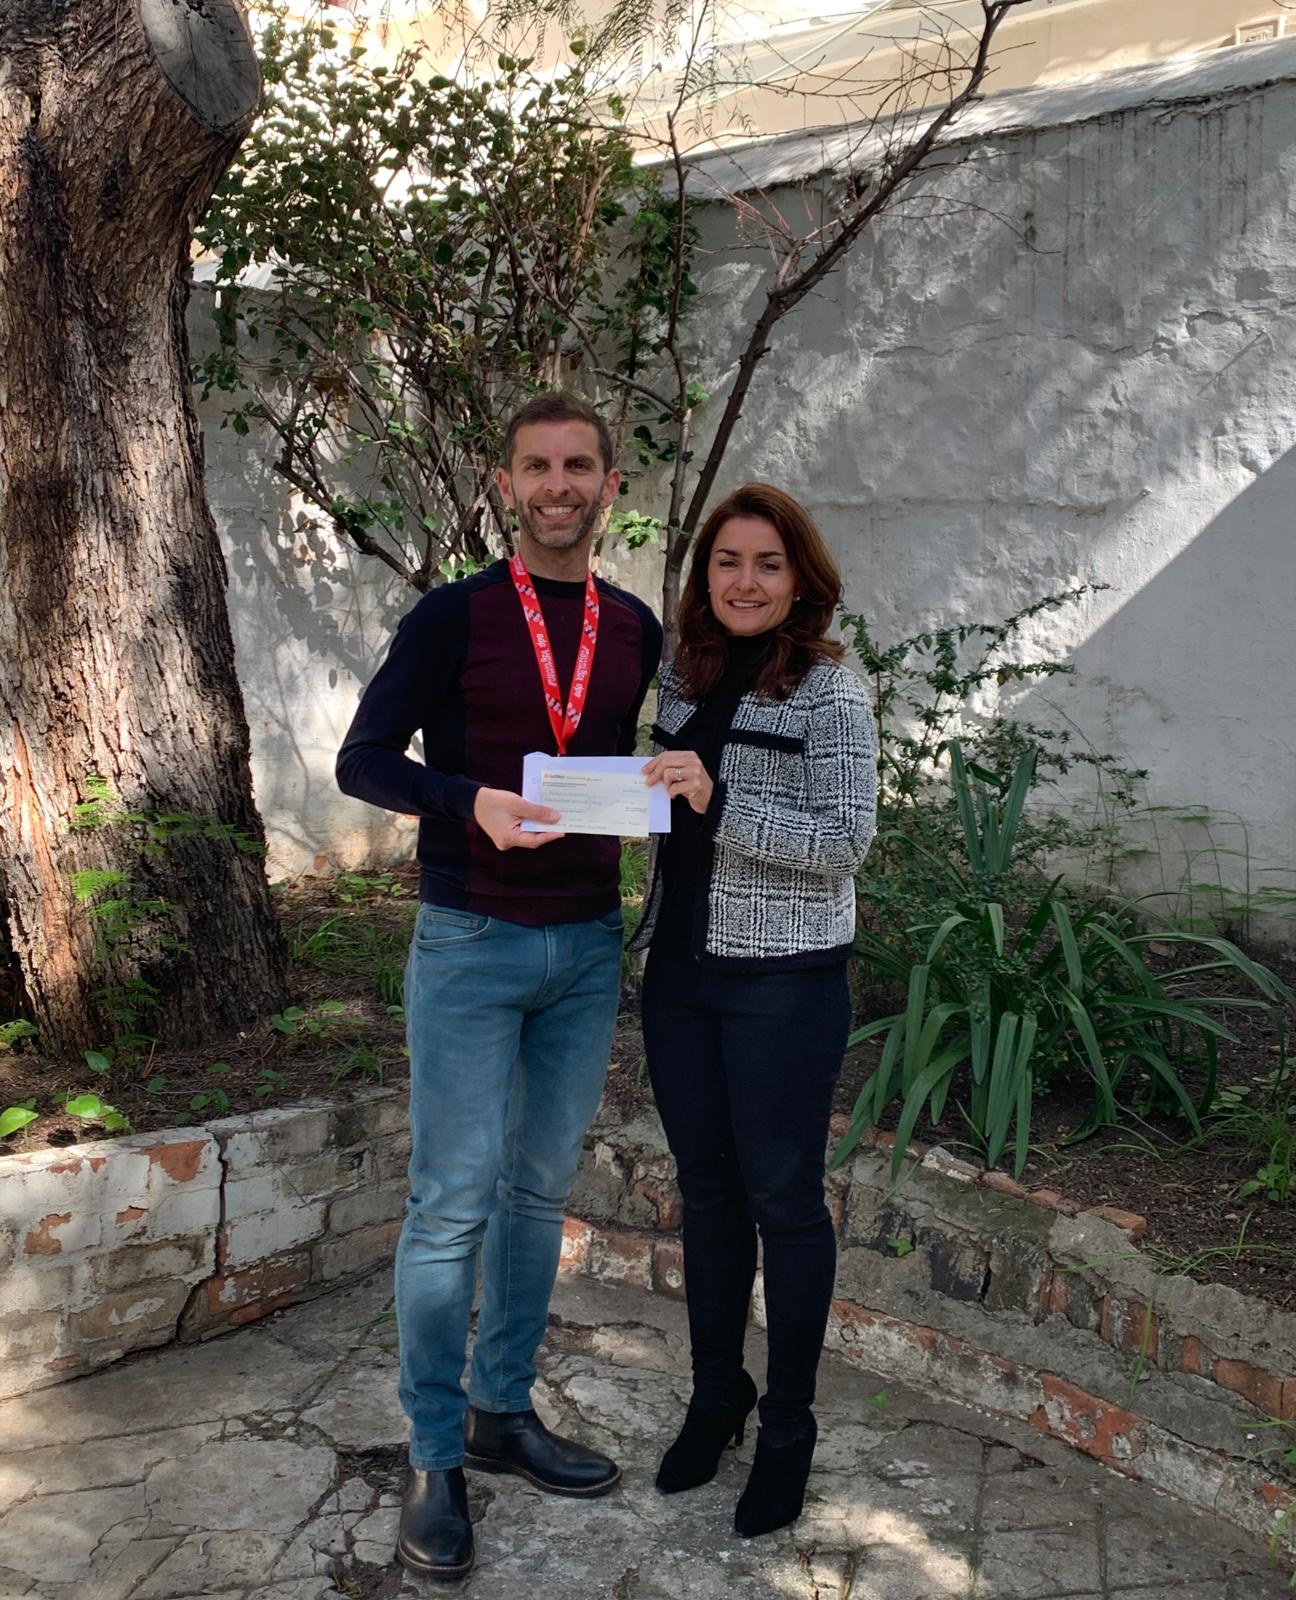 February 2020 - Ivan Ford took part in the Seville Half Marathon and raised £300 for our school projects, thank you Ivan !!